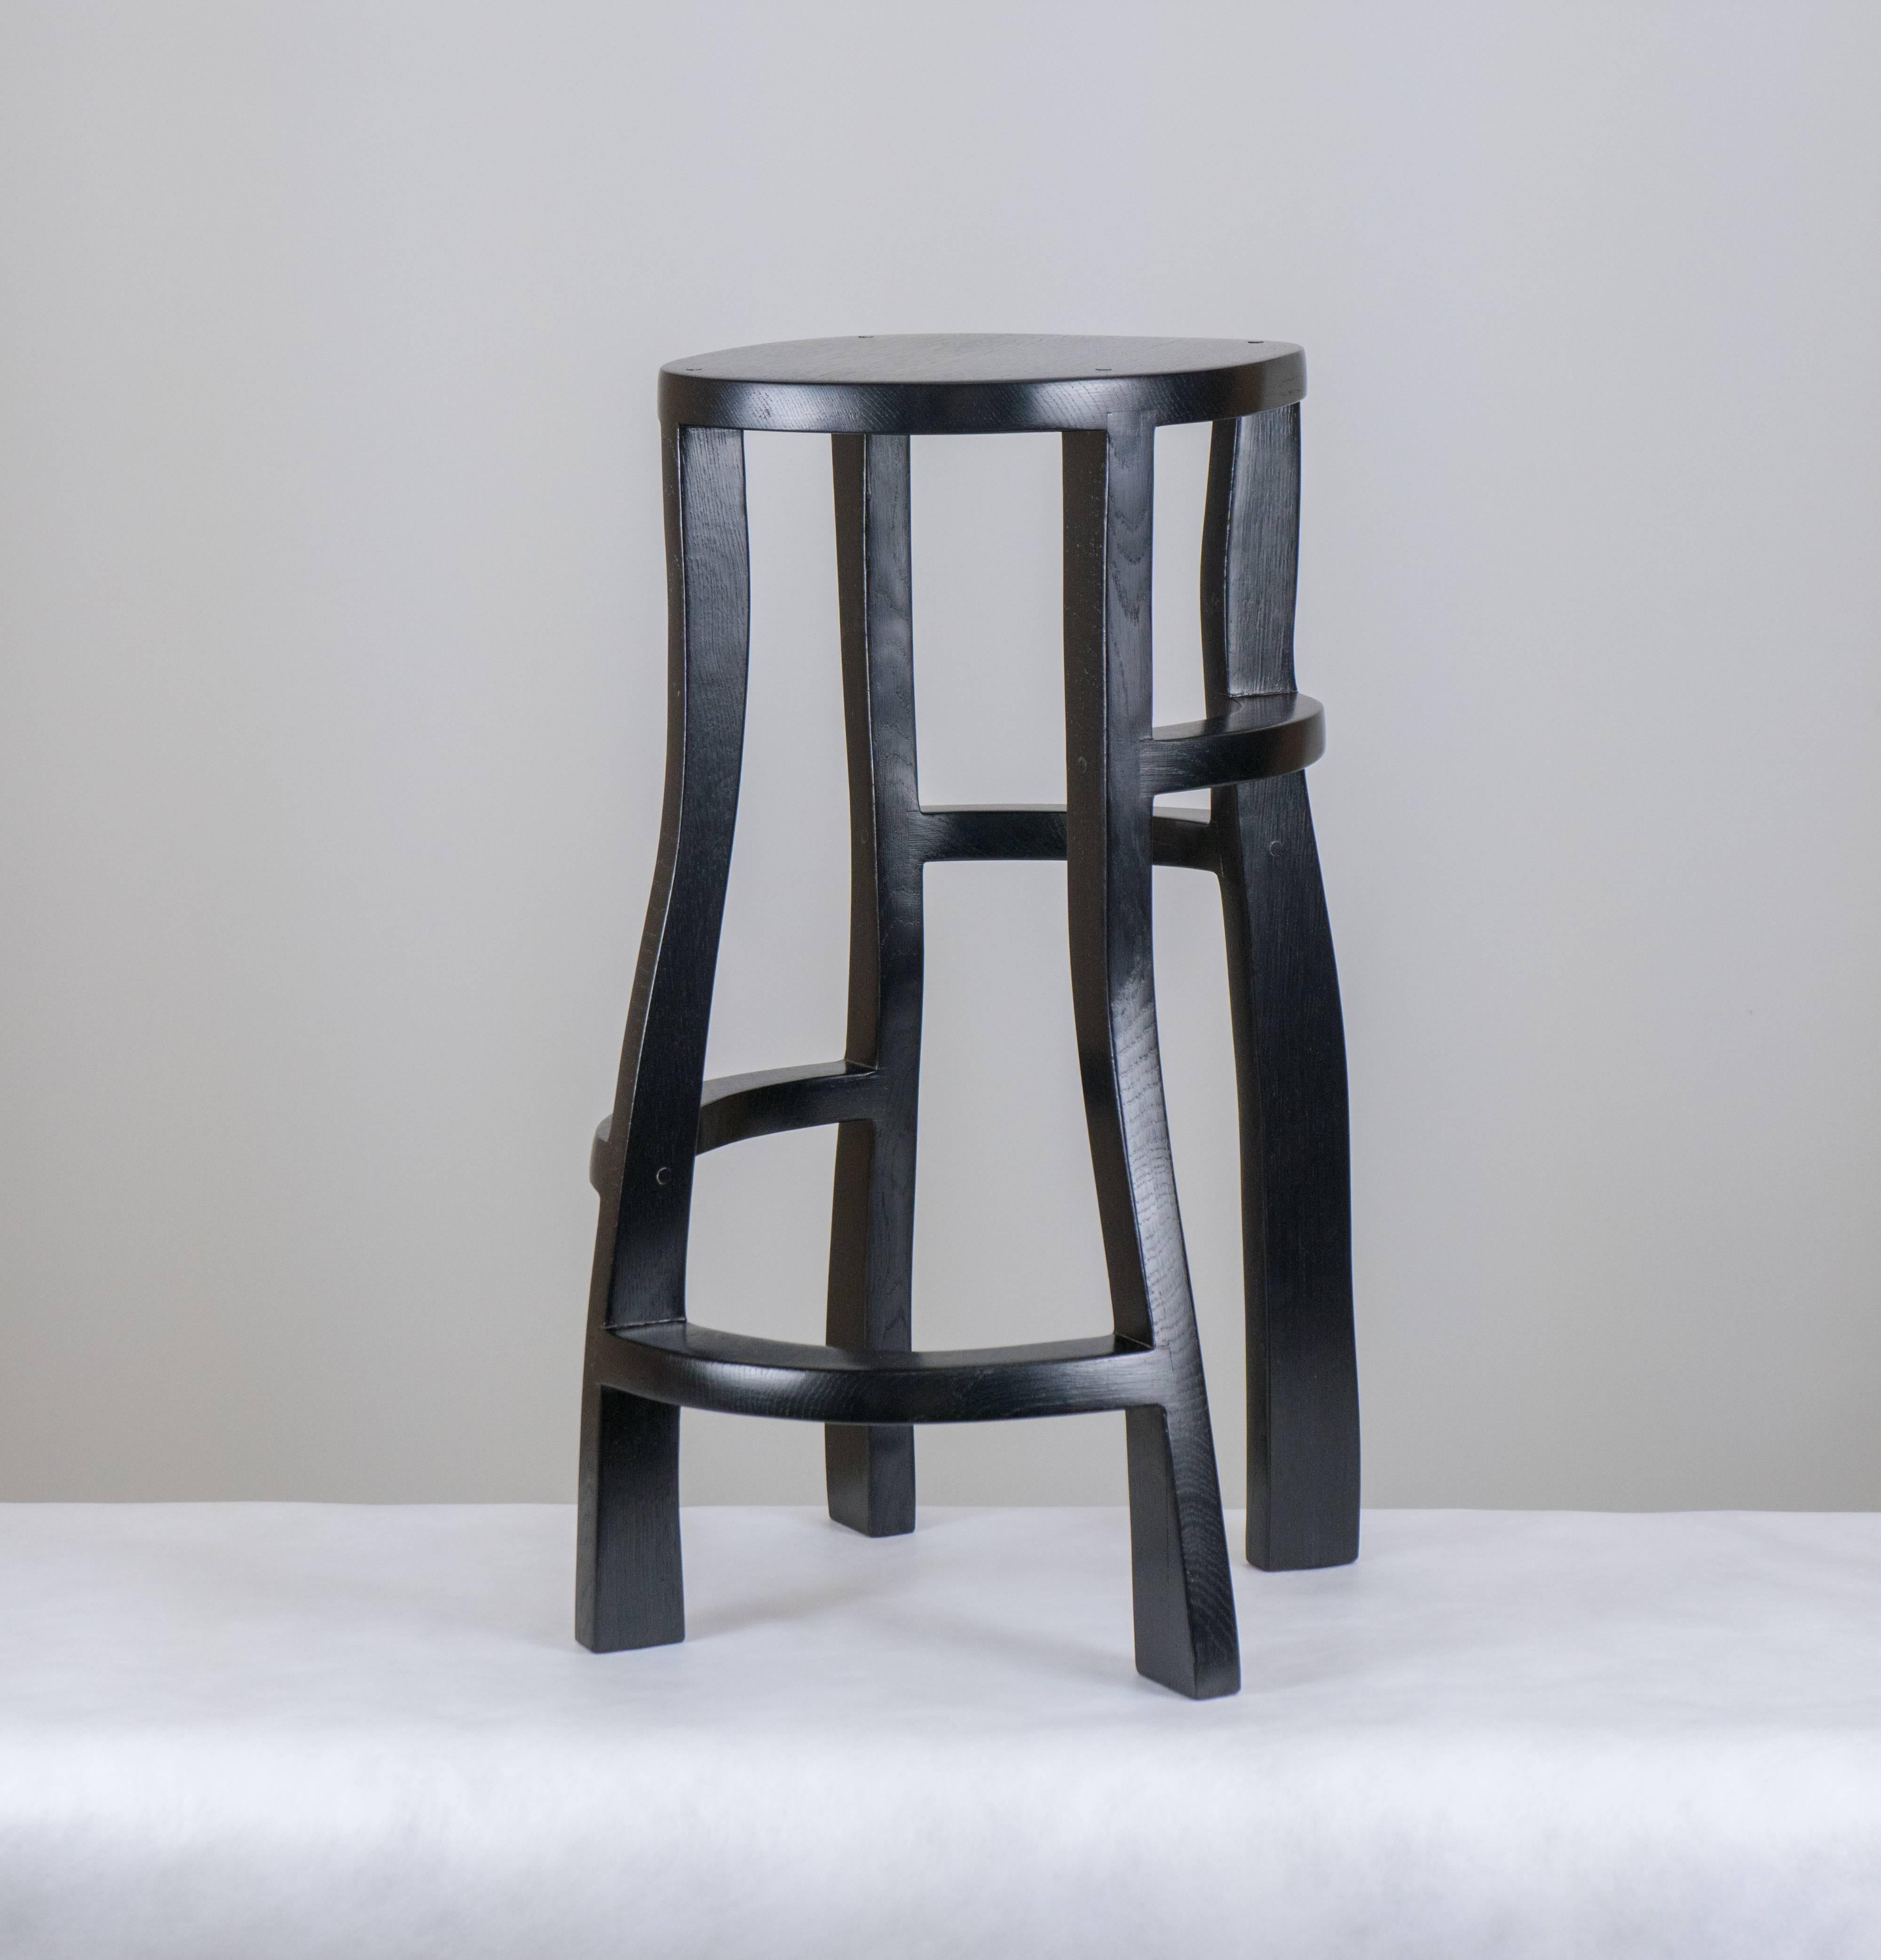 Sculpted bar stools in stained oak by Jacques Jarrige. Sculpture as much as functional stool this piece, arrested in movement, always remains captivating from every angle.

Jacques Jarrige was born into a Parisian family of art collectors and